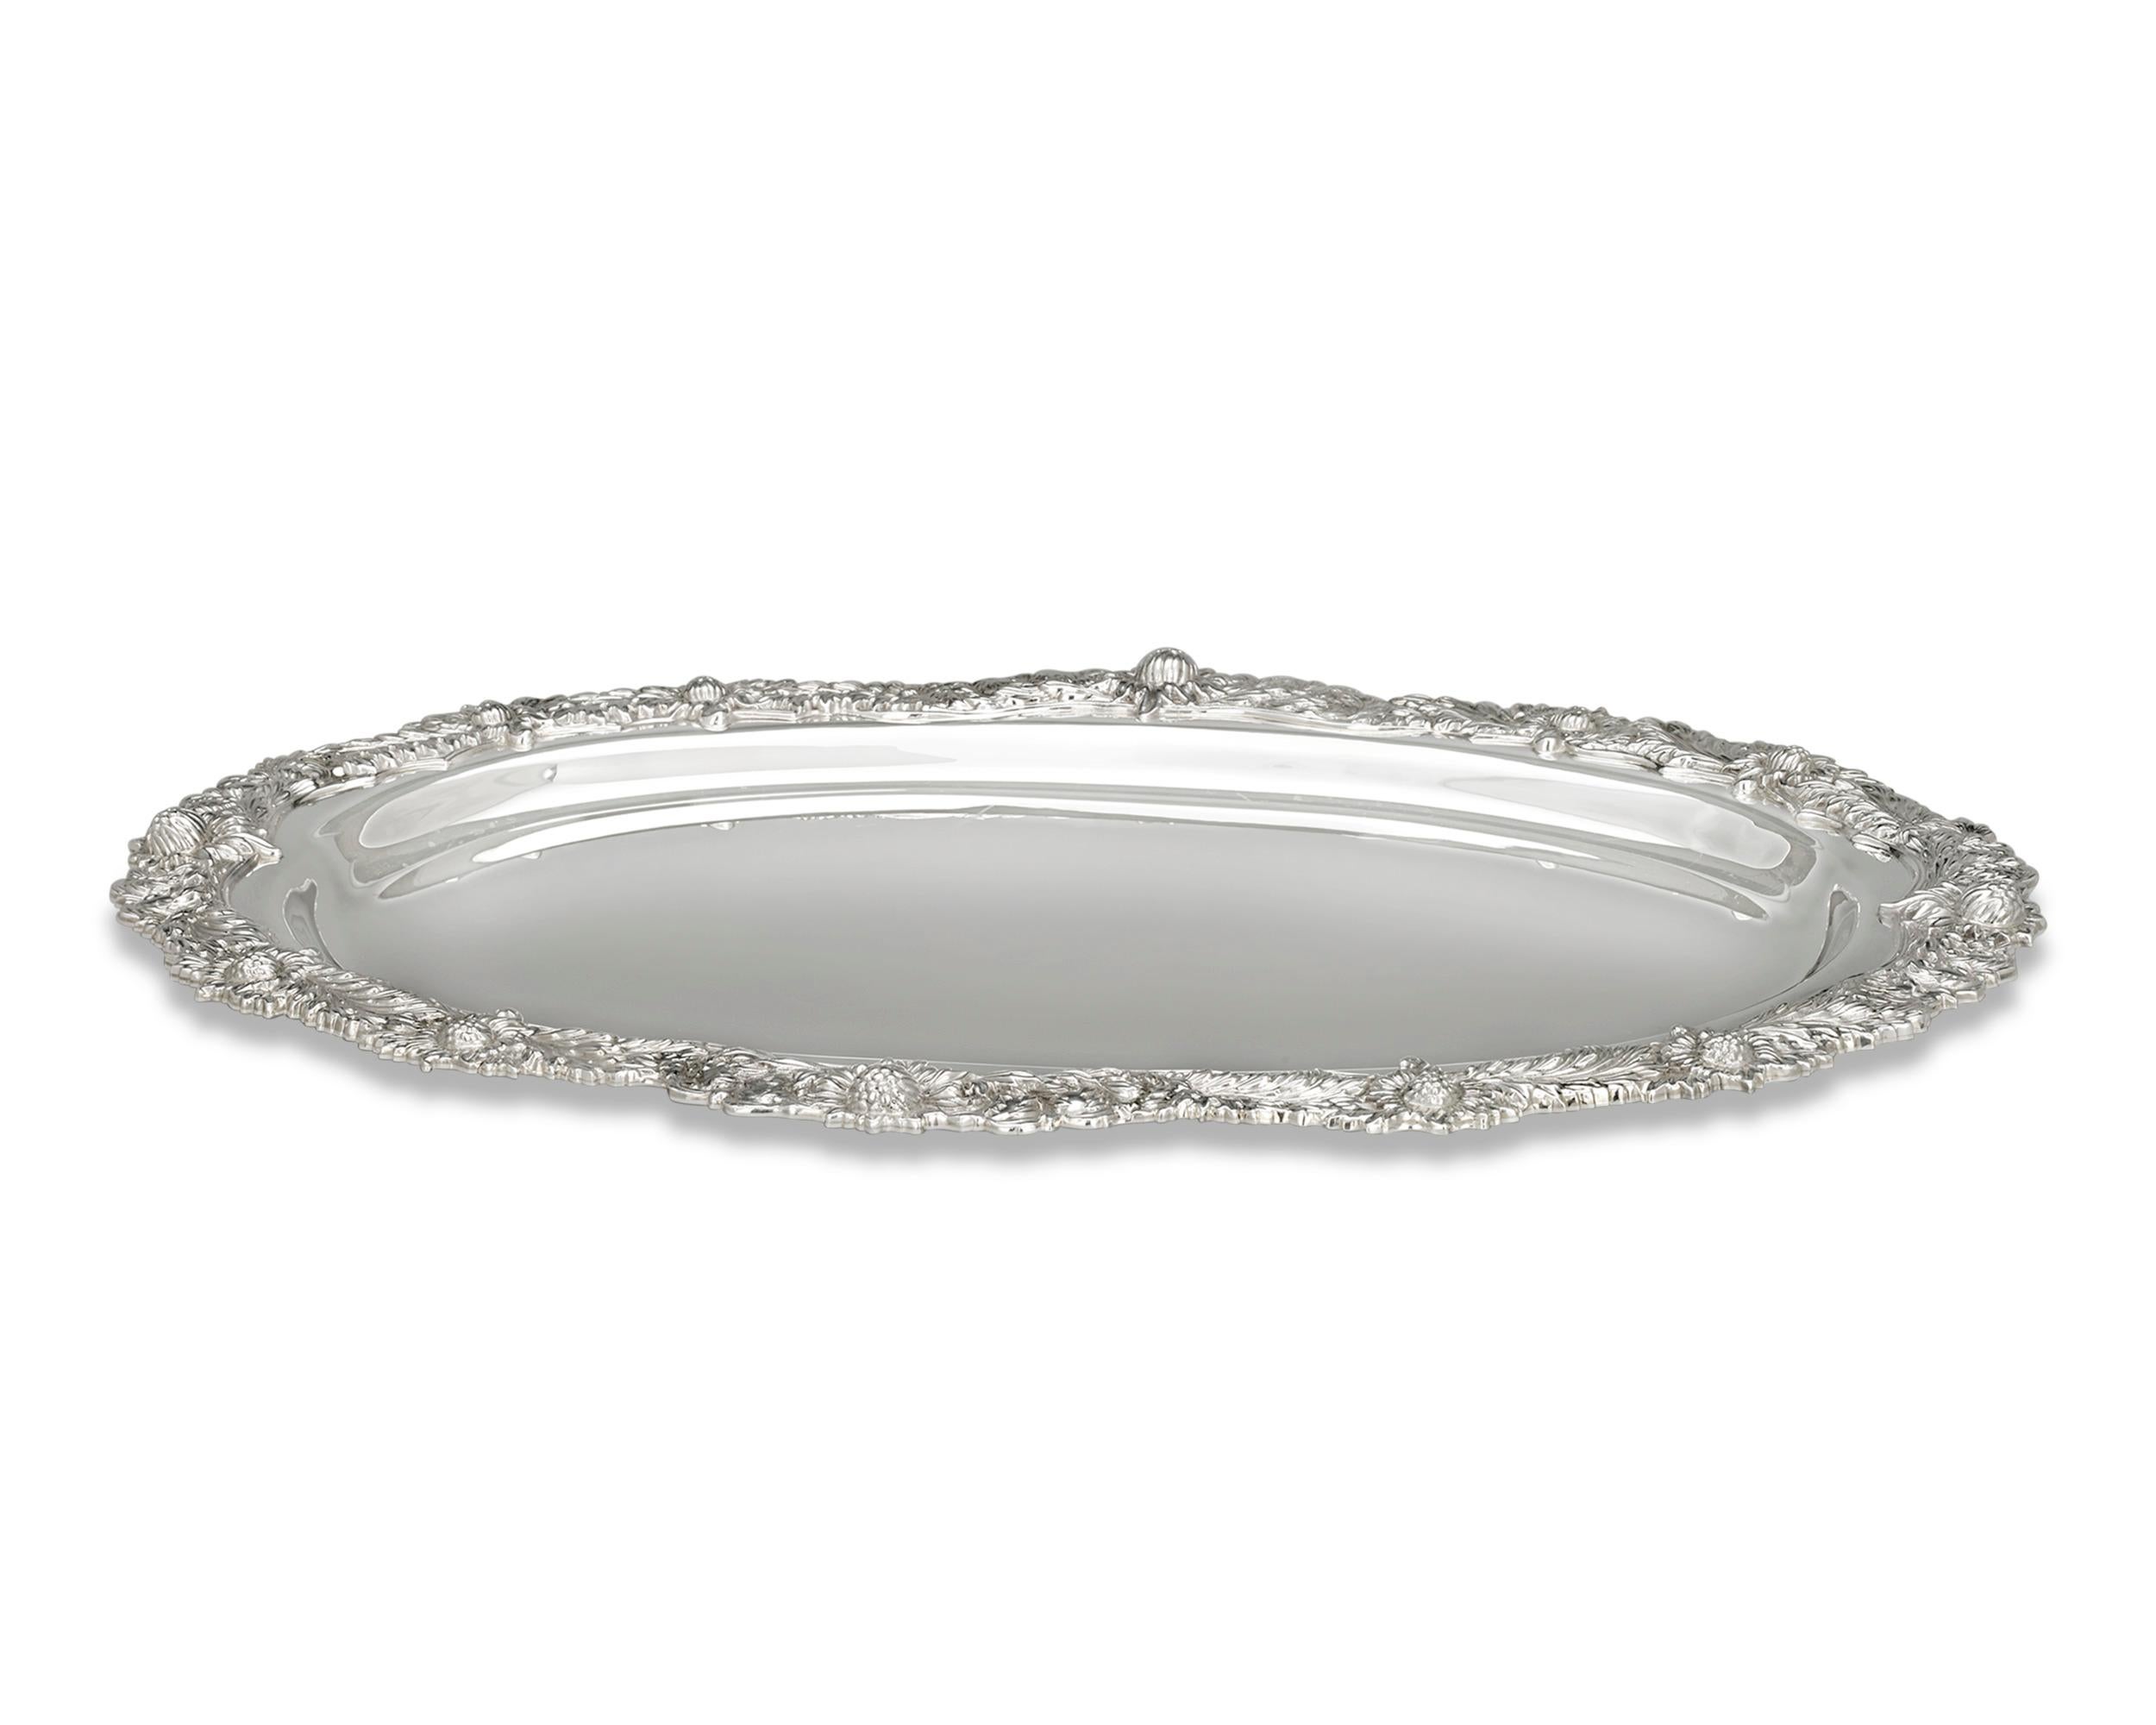 This sterling silver tray was crafted by the incomparable Tiffany & Co. in the widely recognized Chrysanthemum pattern. The motif's namesake flowers are expertly chased and applied around the elegantly scalloped rim. Expertly crafted, the highly